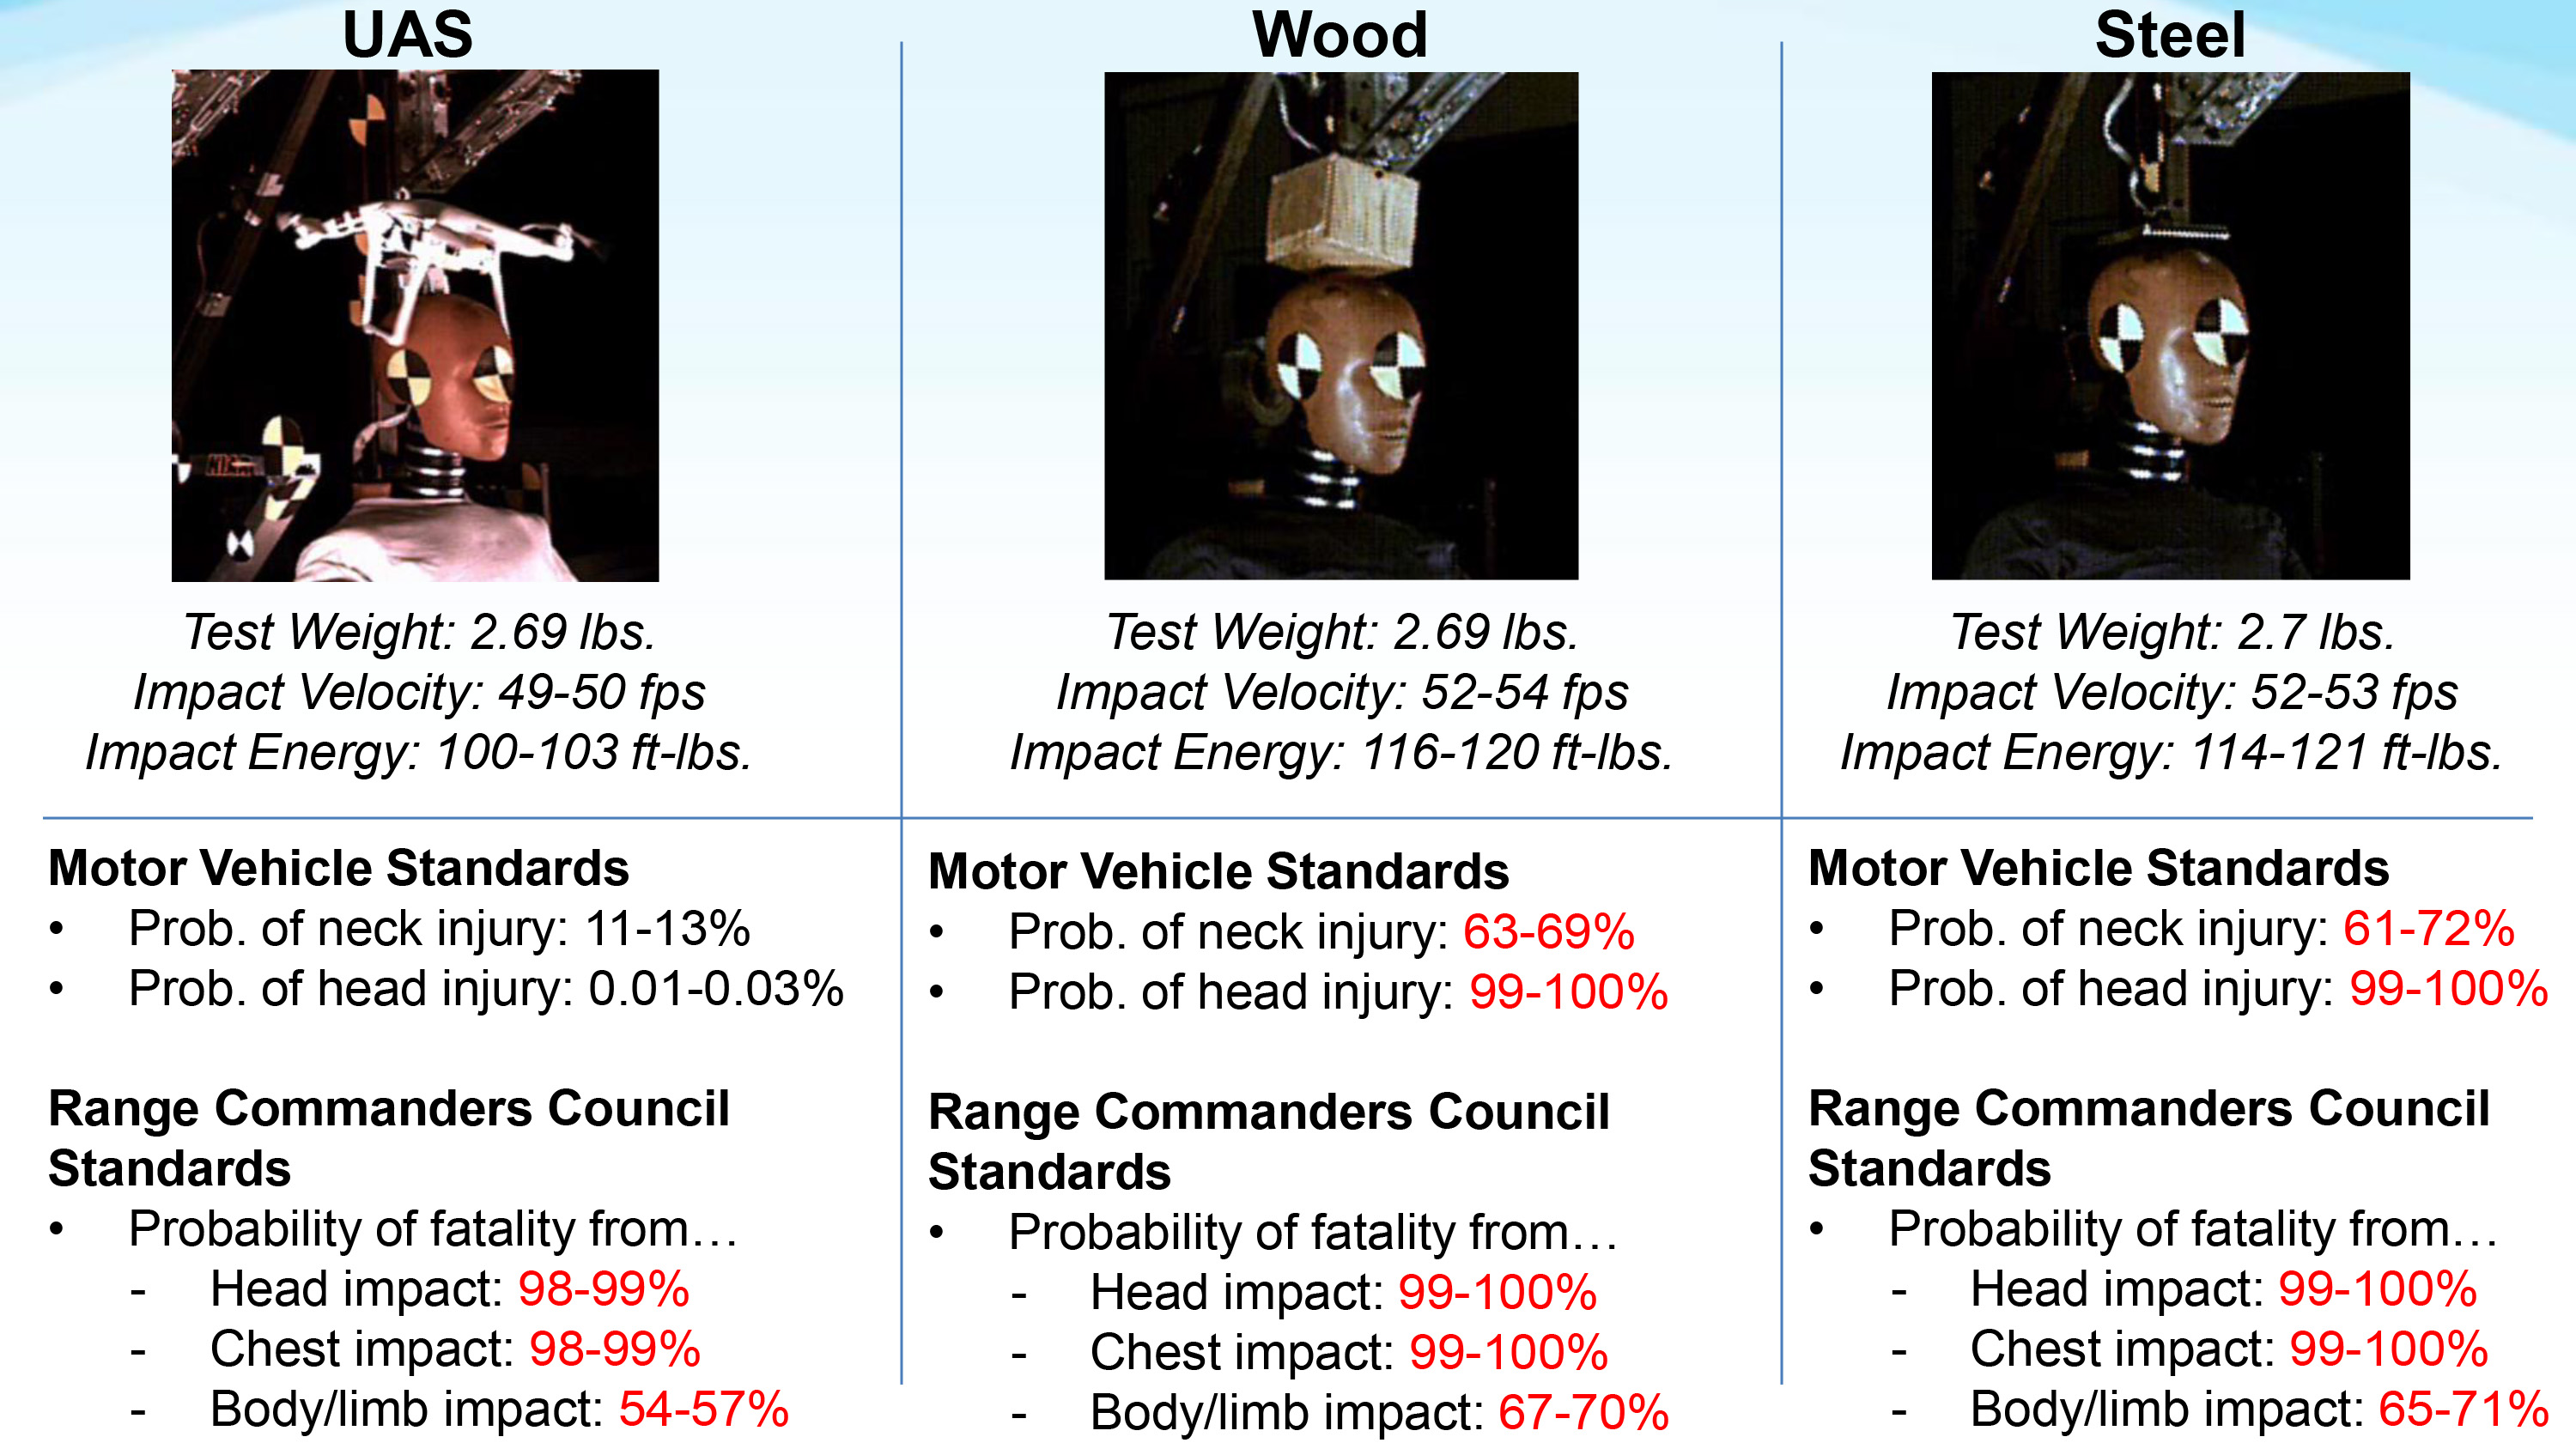 Researchers compared the injury risk posed by a falling DJI Phantom 3 to pieces of wood and metal with the same mass in controlled impacts with automotive crash dummies. FAA graphic. Click to view larger image.